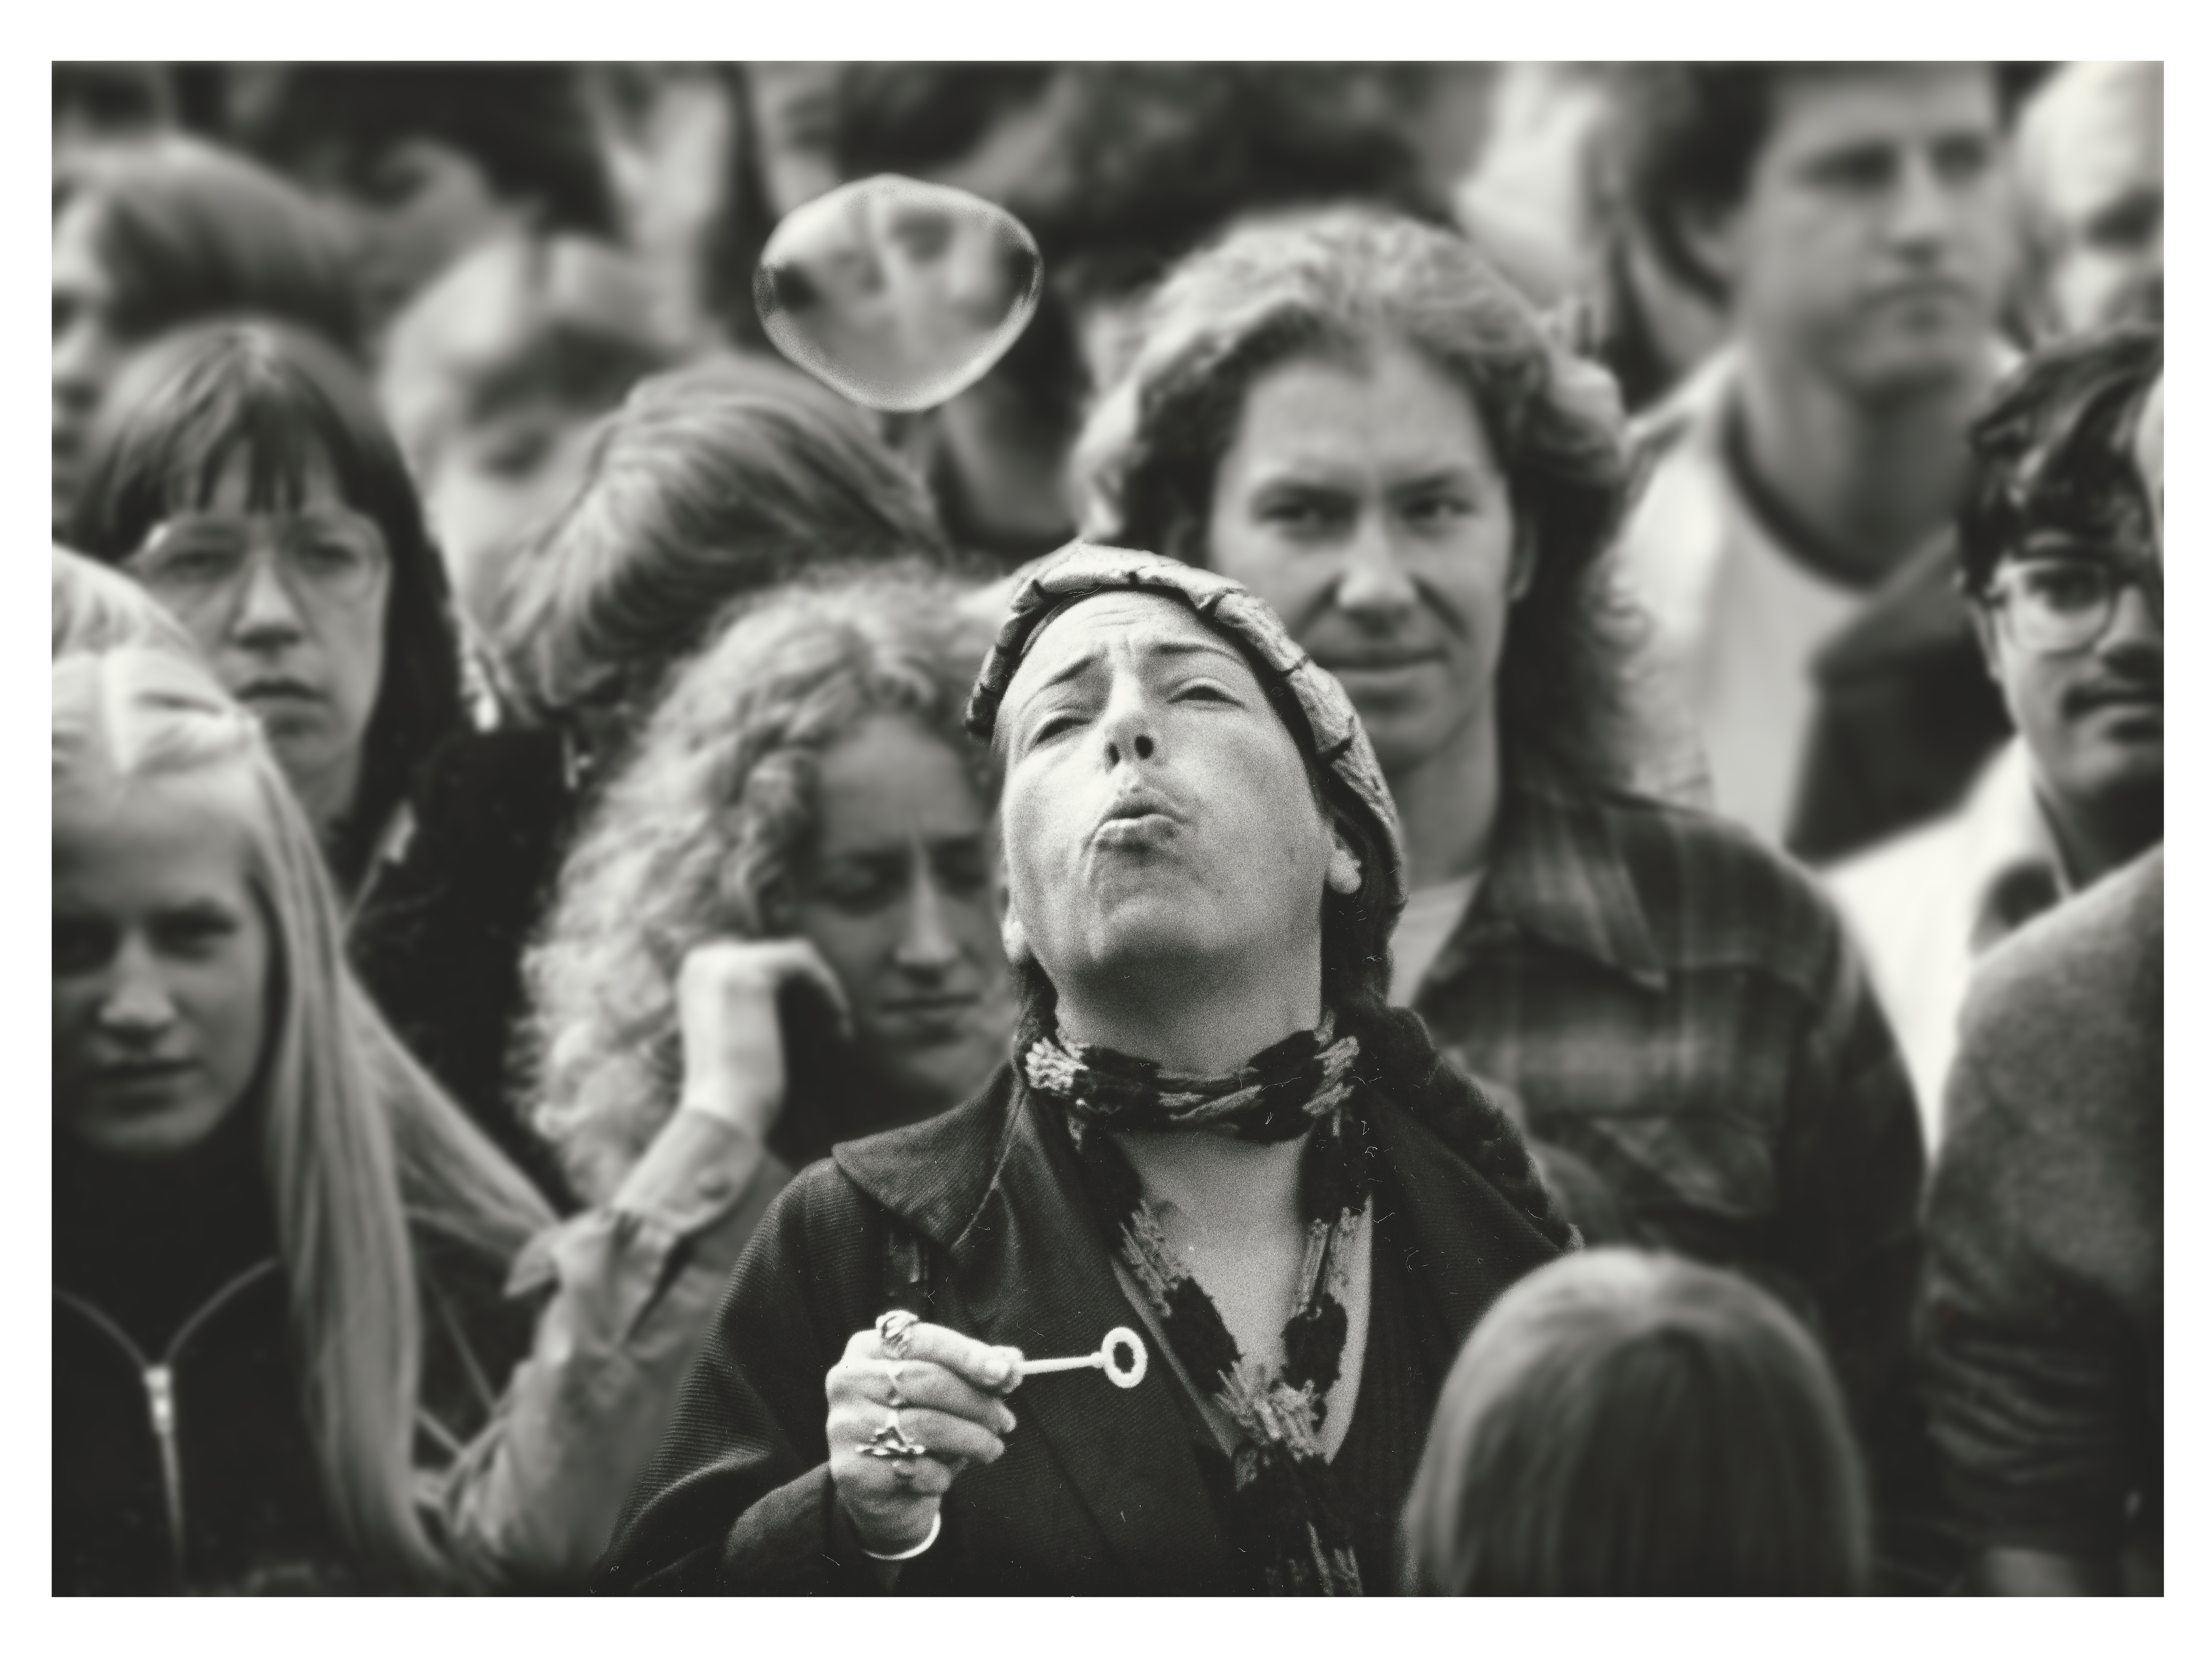 A black and white photograph of a woman blowing bubbles.